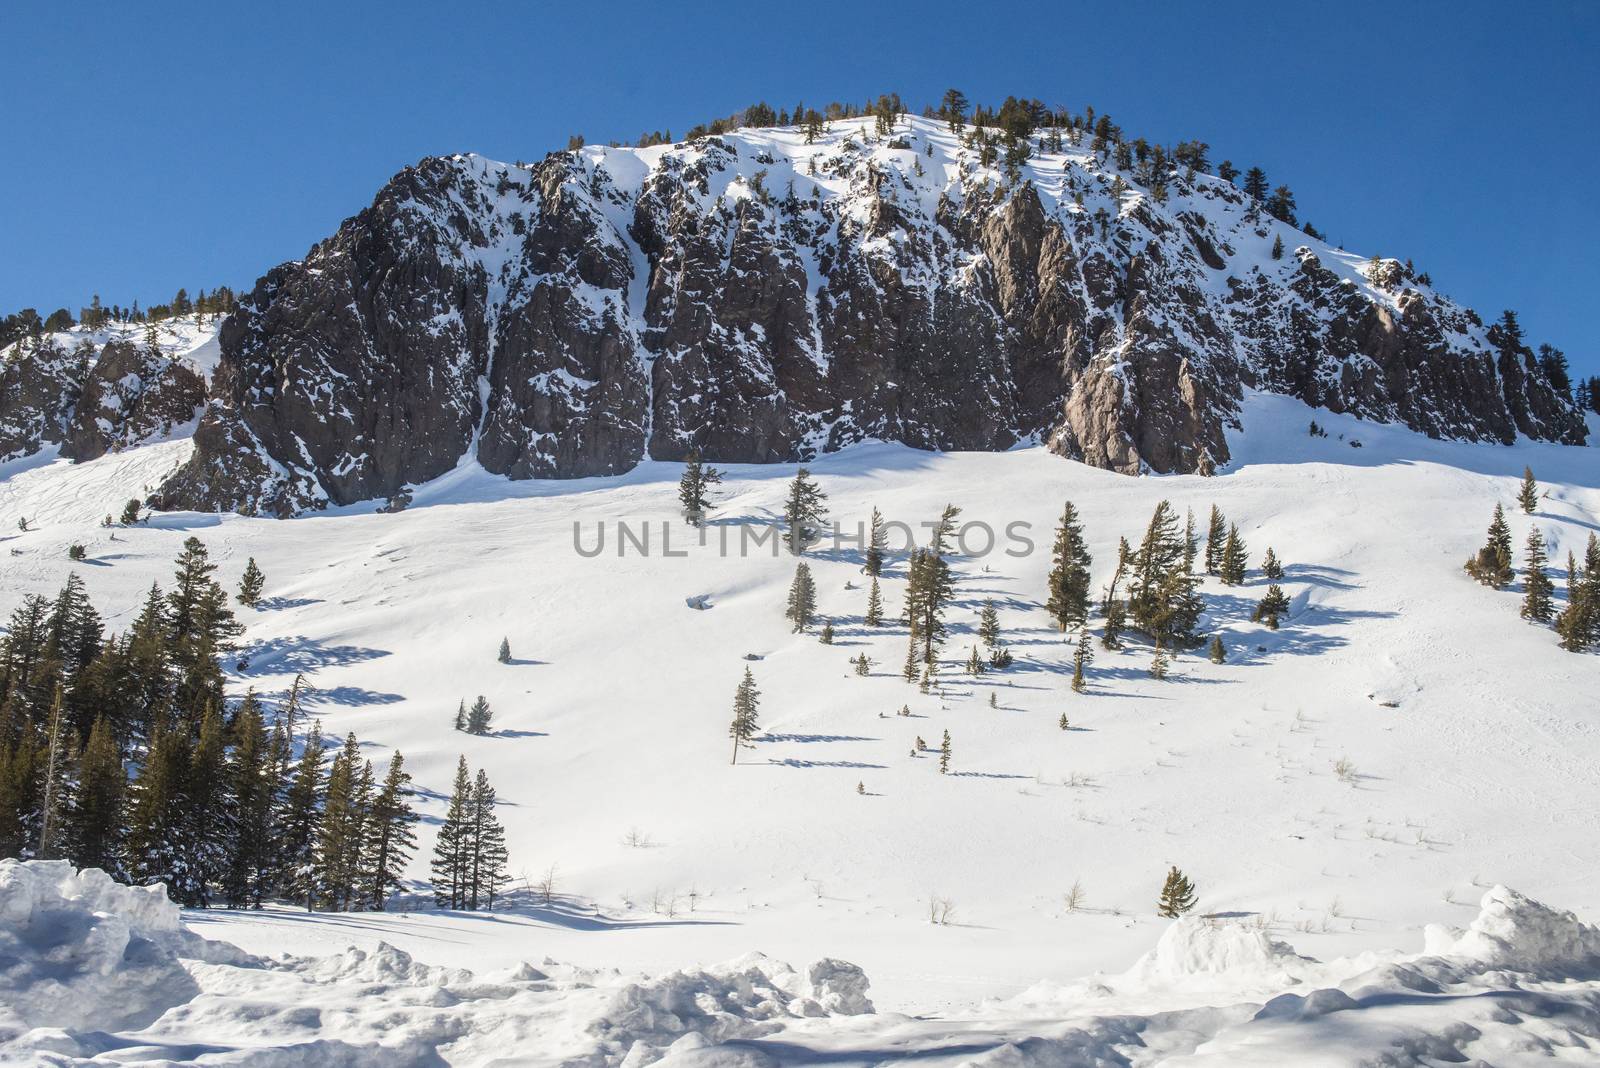 View of the snow-covered hill with pine trees in Mammoth Lakes, California